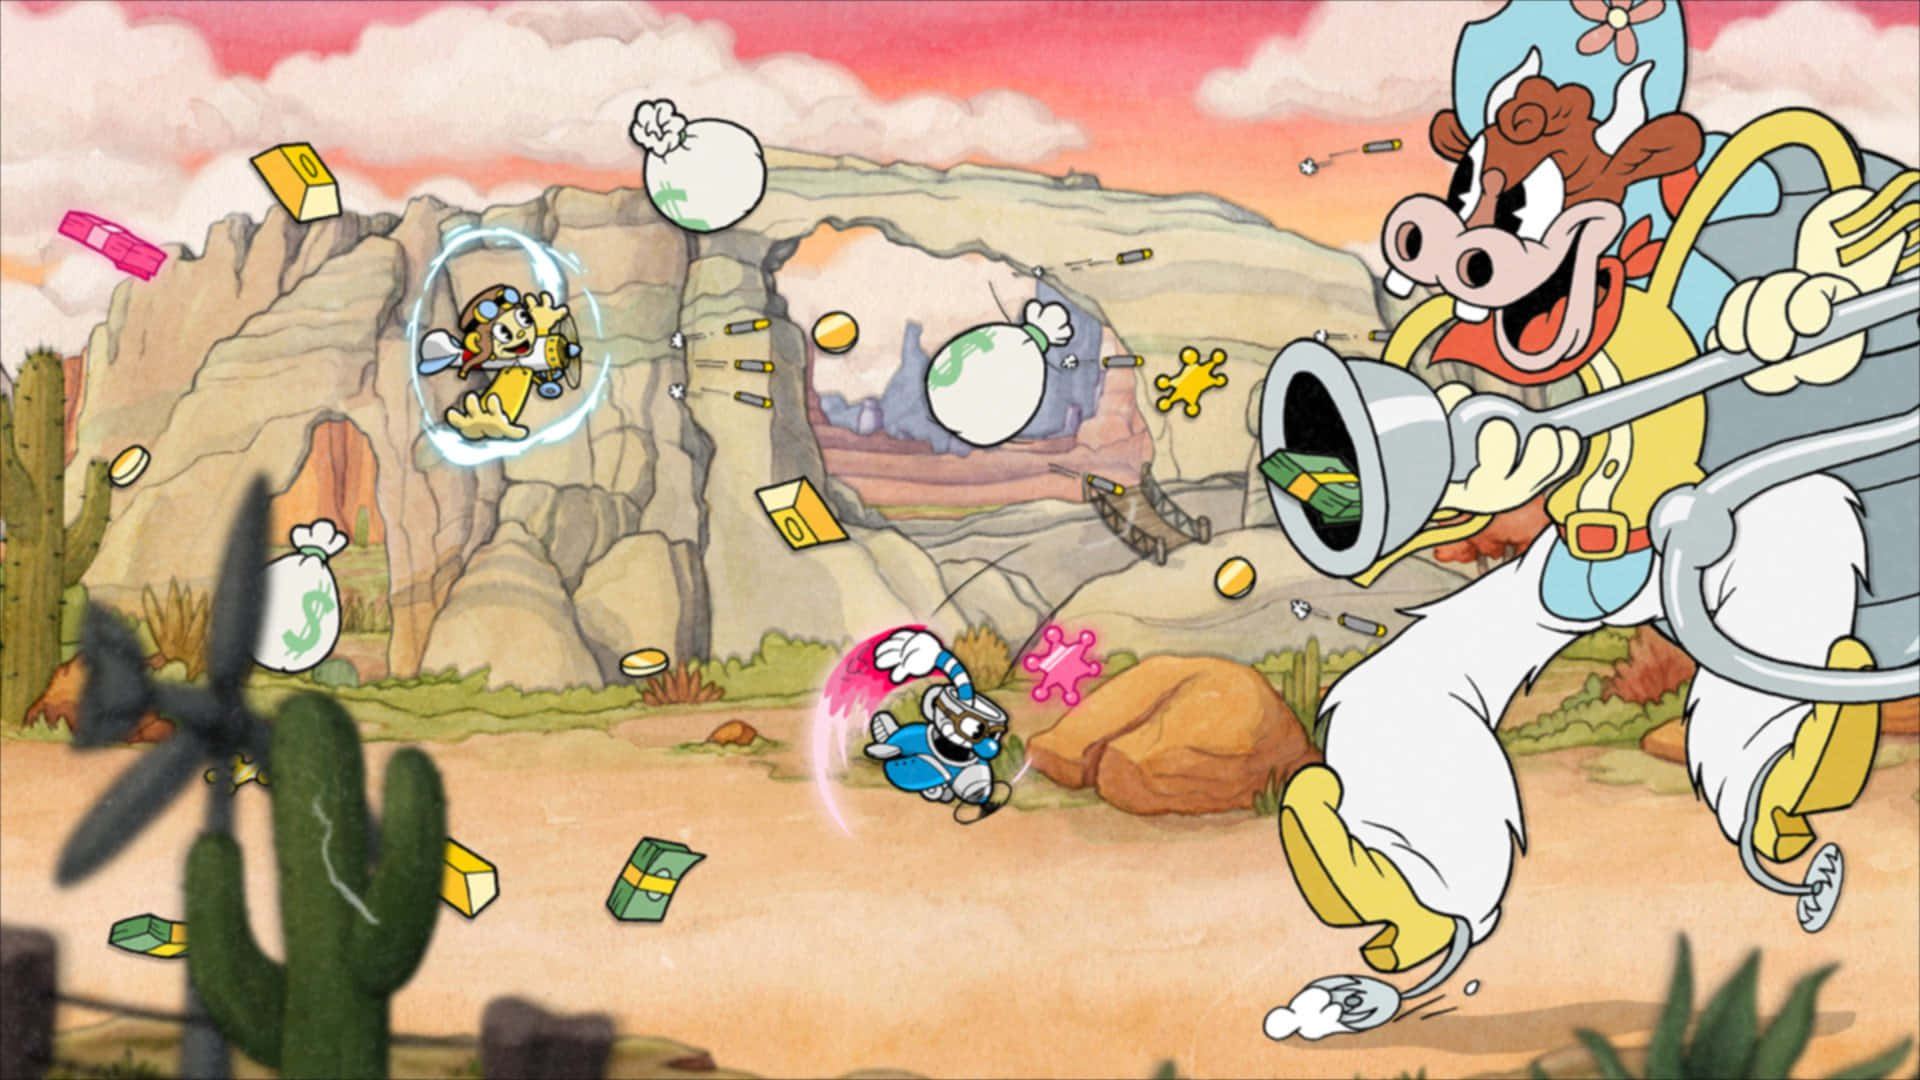 Join Cuphead in an adventure of a lifetime!